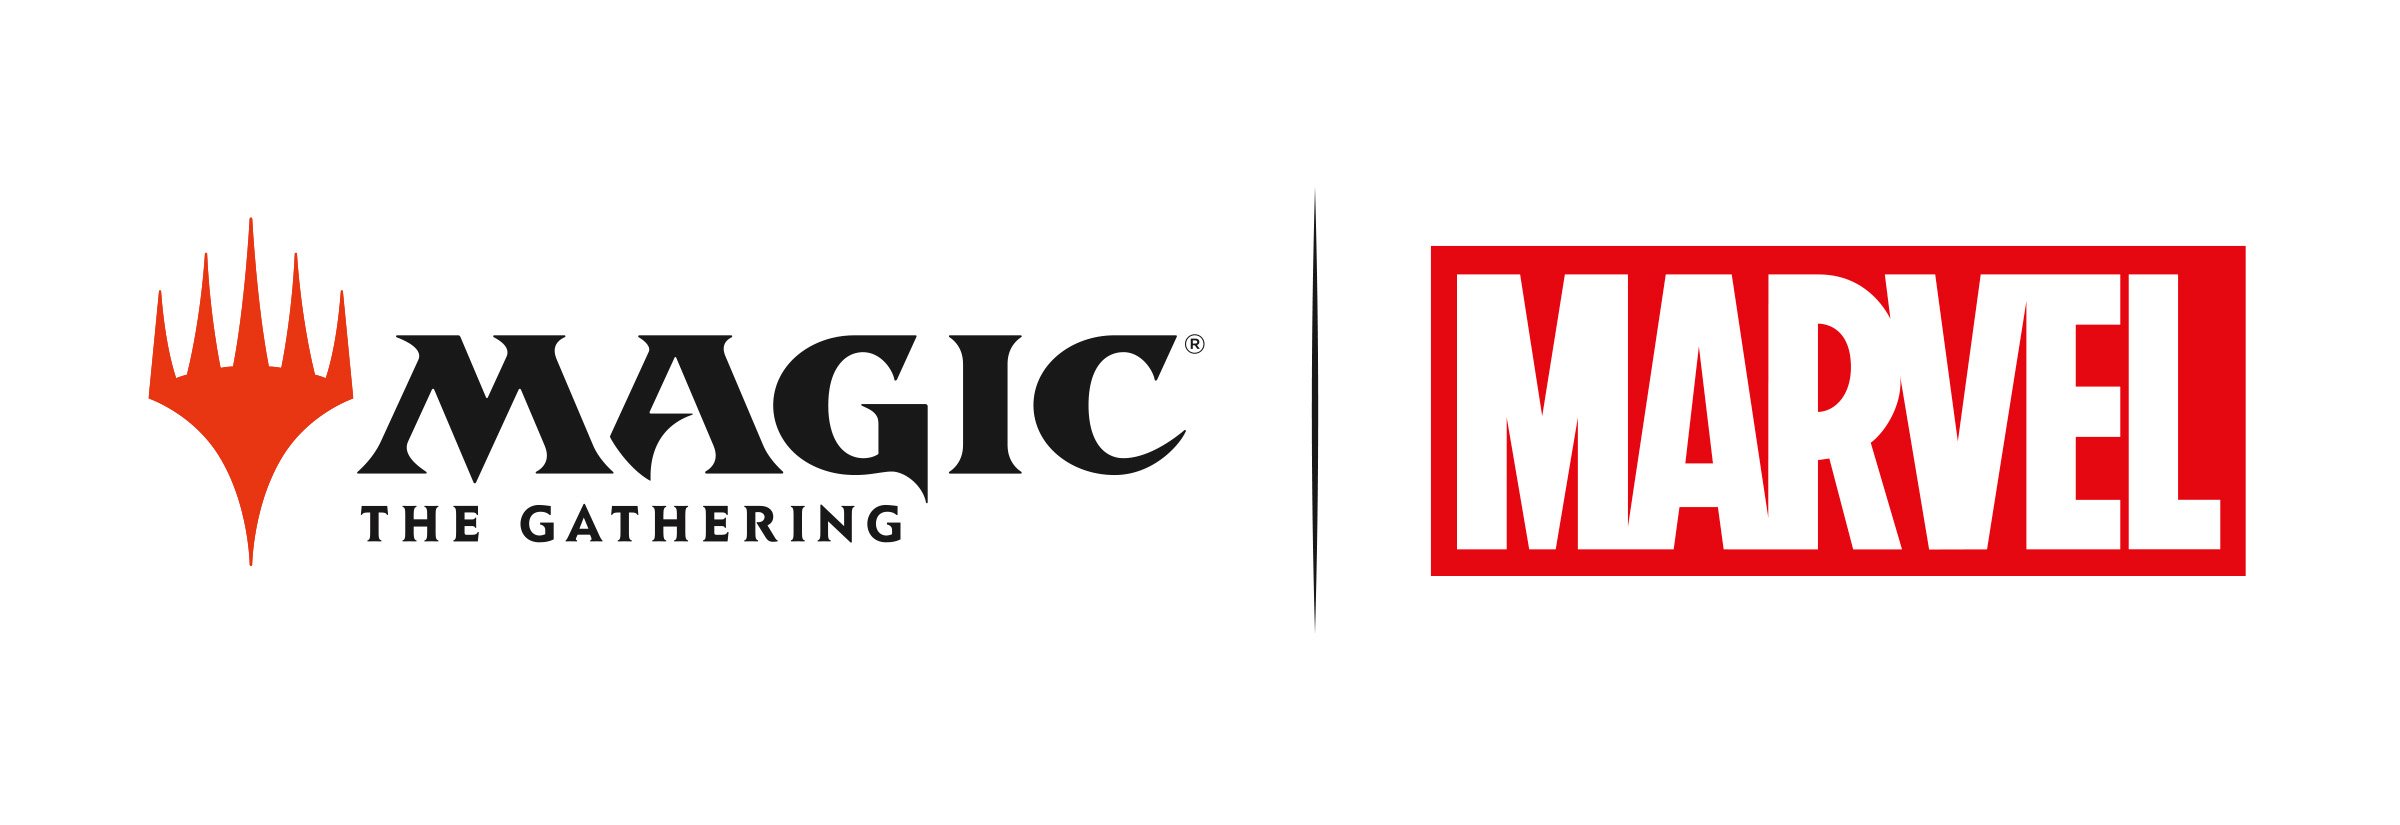 Image of MTG and Marvel logos together through Universes Beyond crossover